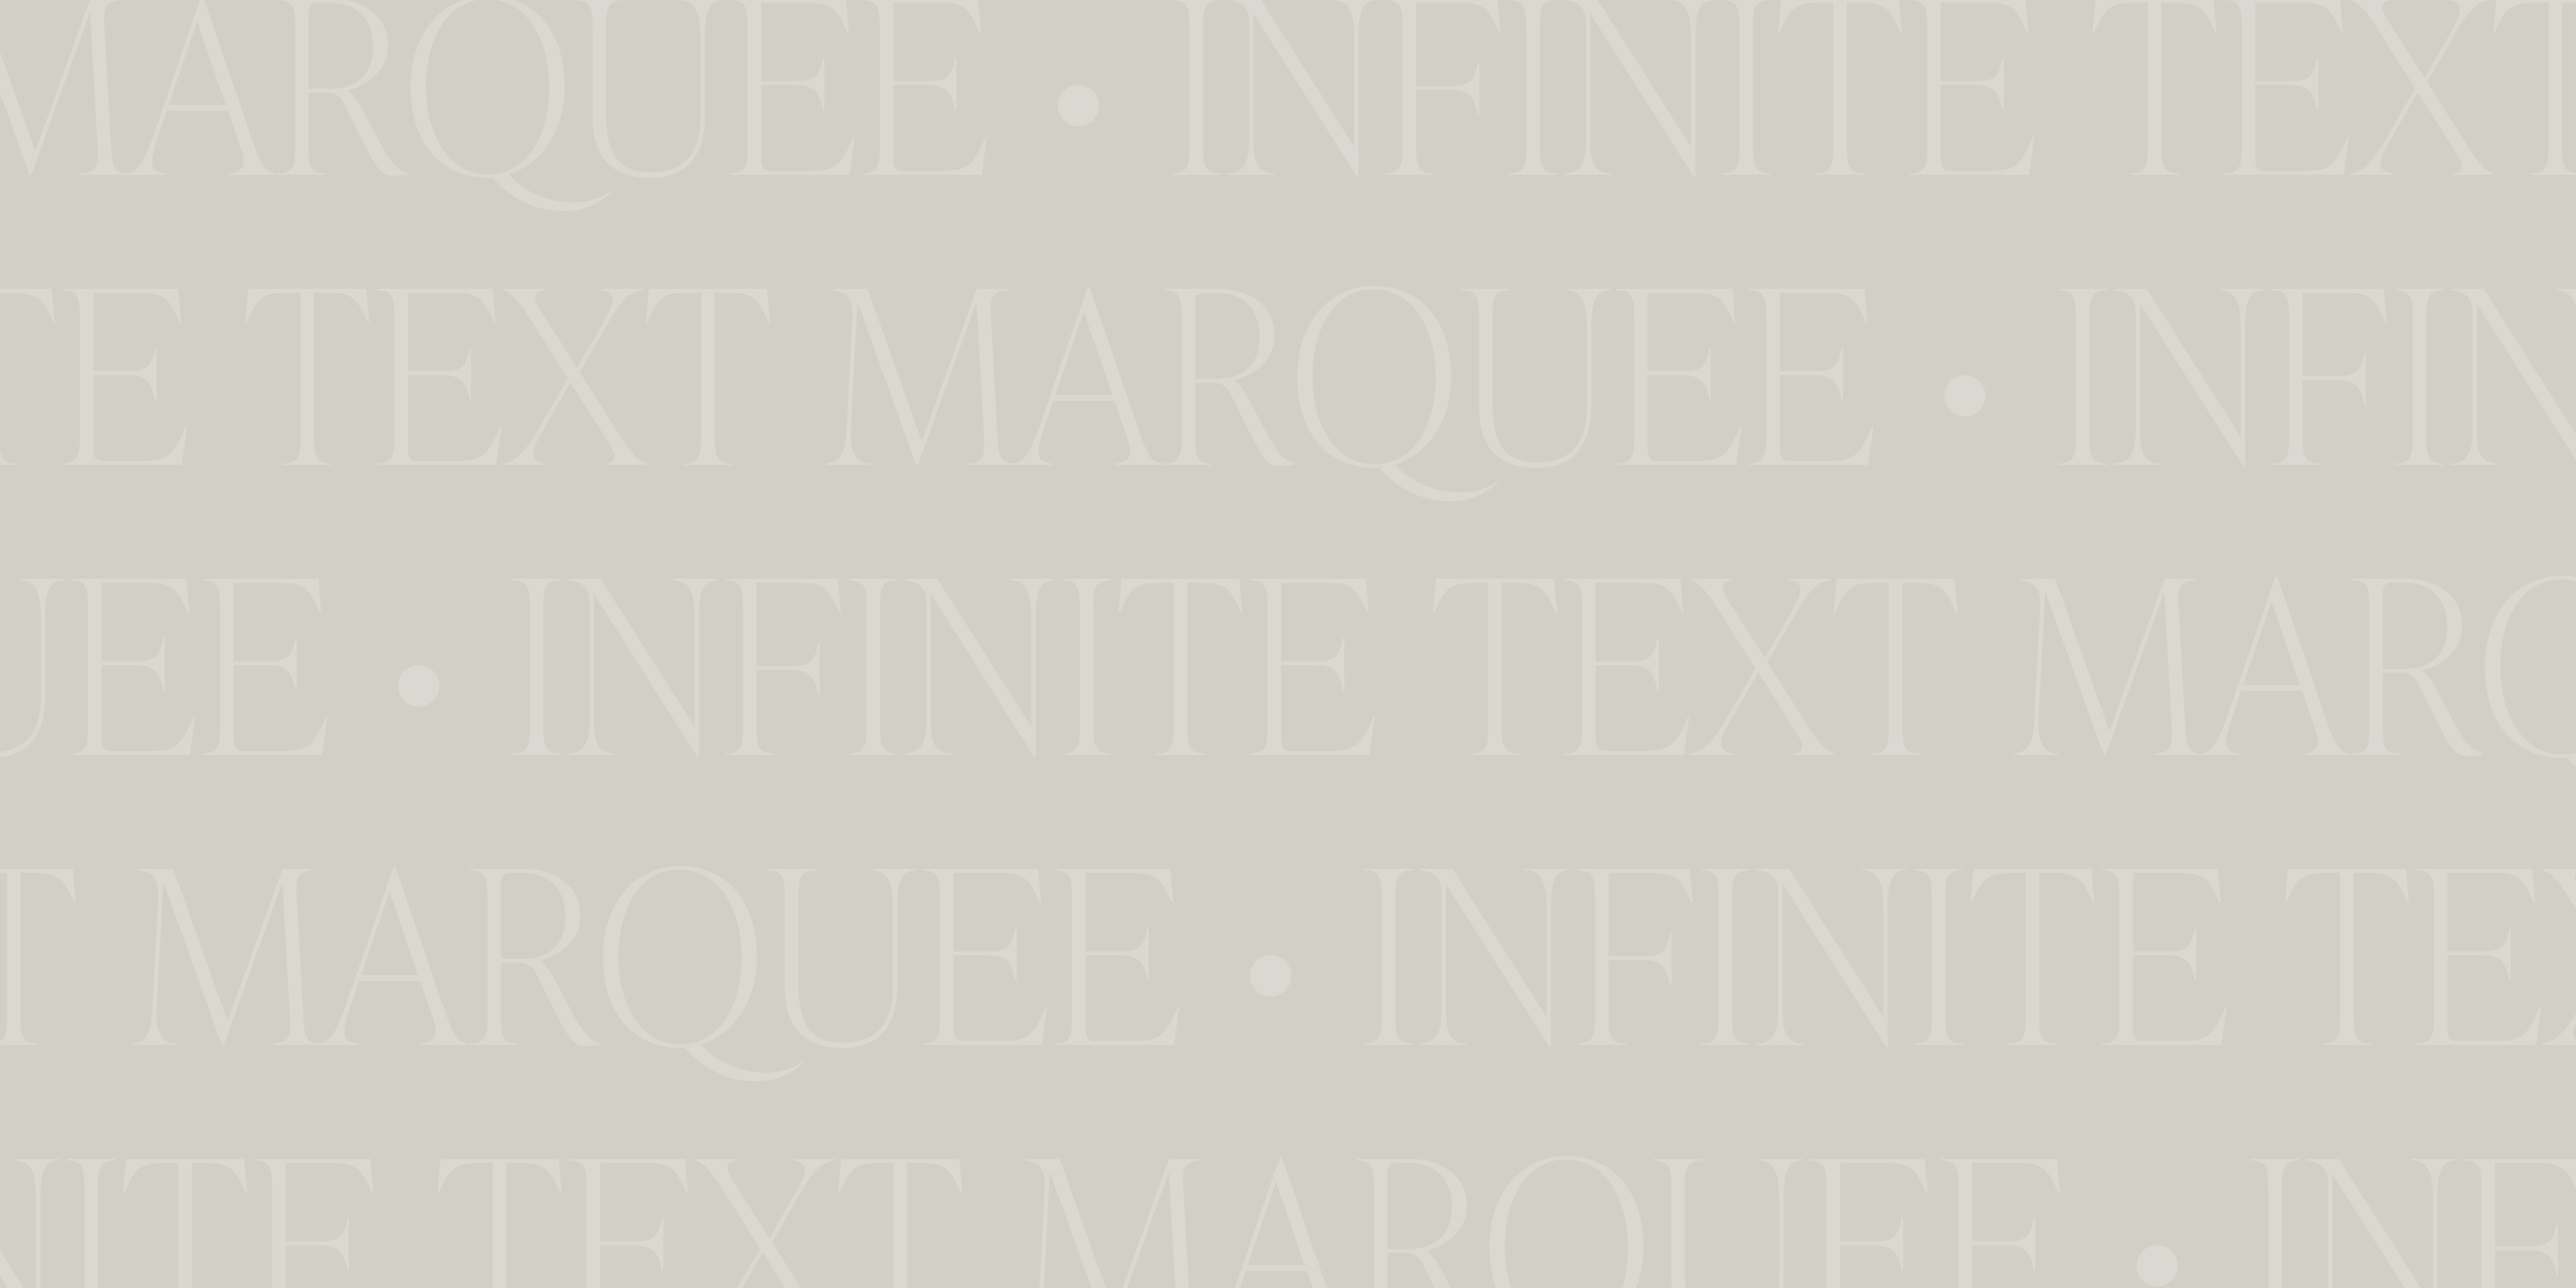 Infinite Text Marquee